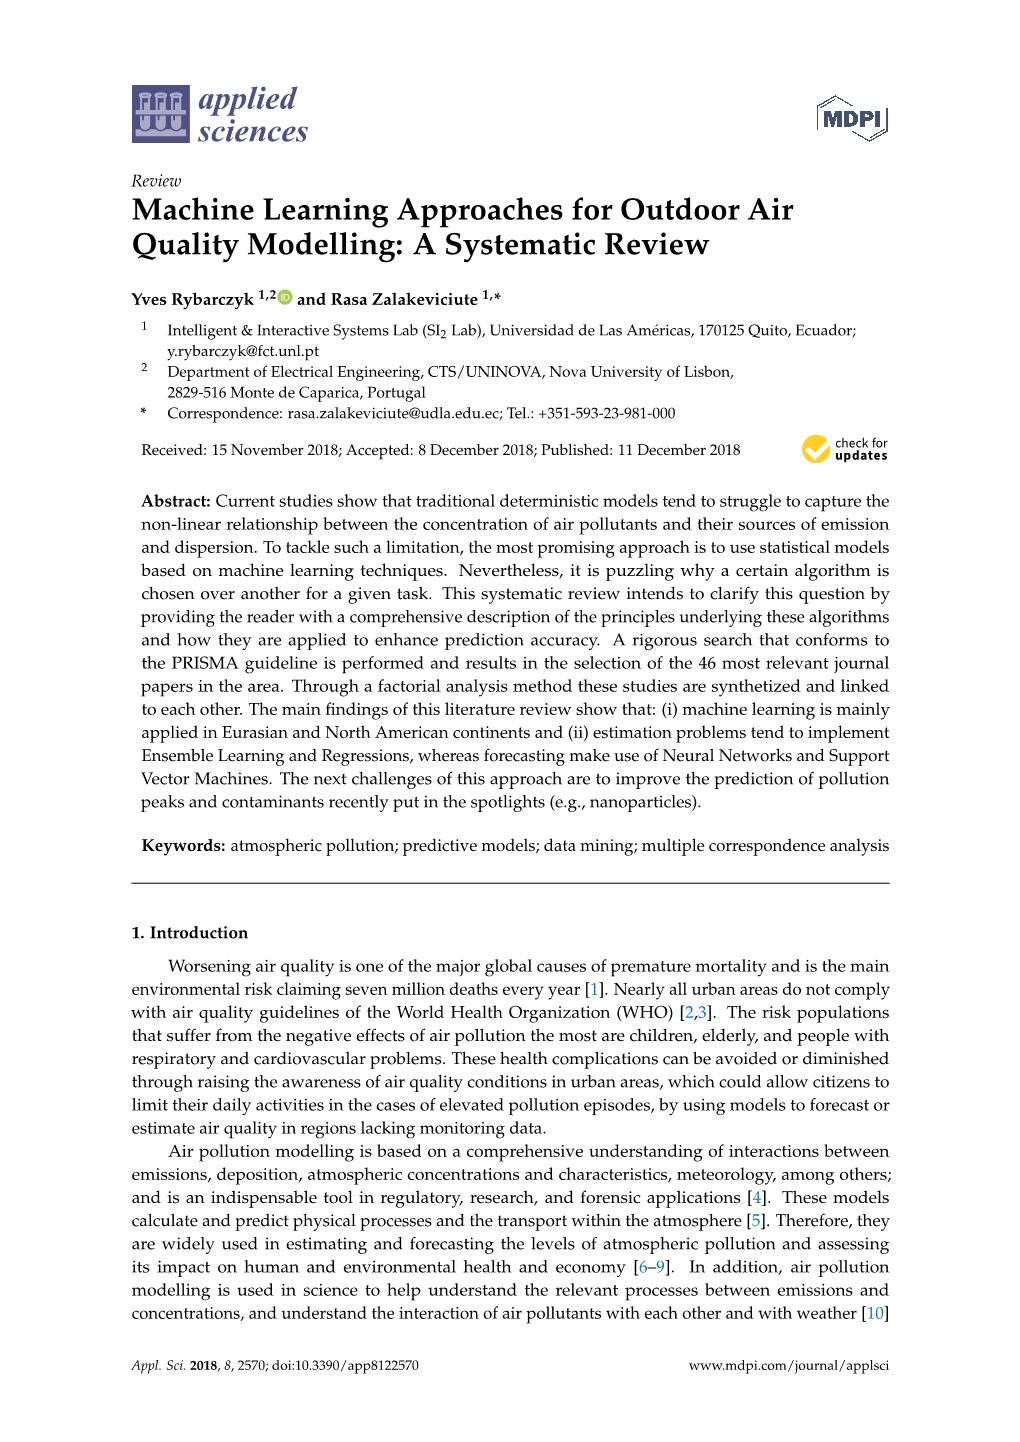 Machine Learning Approaches for Outdoor Air Quality Modelling: a Systematic Review